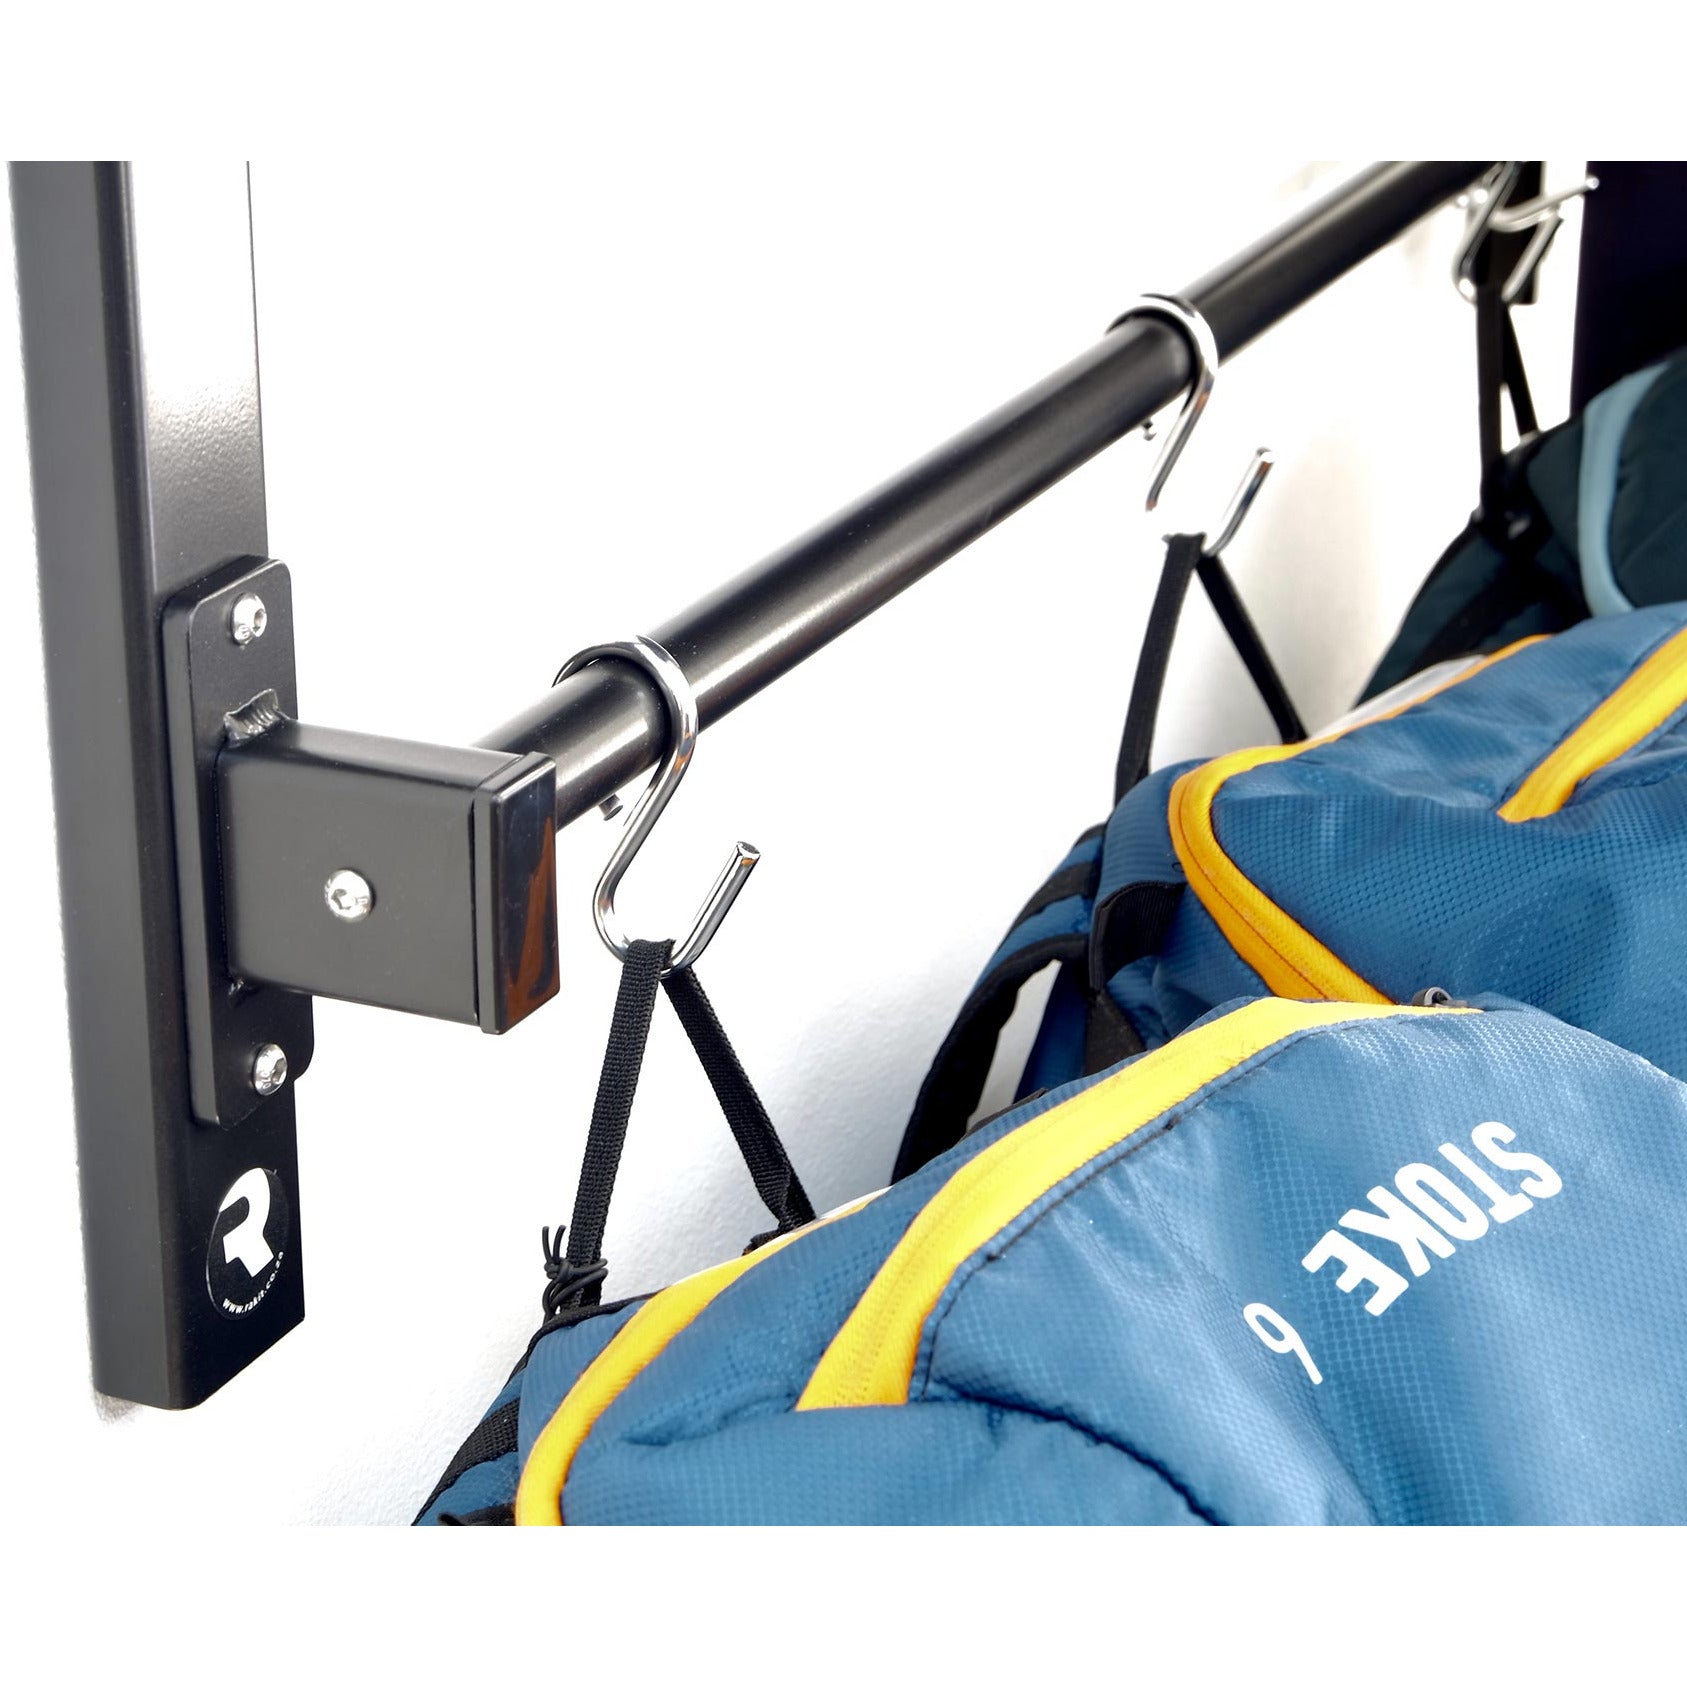 Kite Station Rack by Rakit Systems with four stainless steel hooks for storage of you kites, harness and equipment. #whereboardssleep